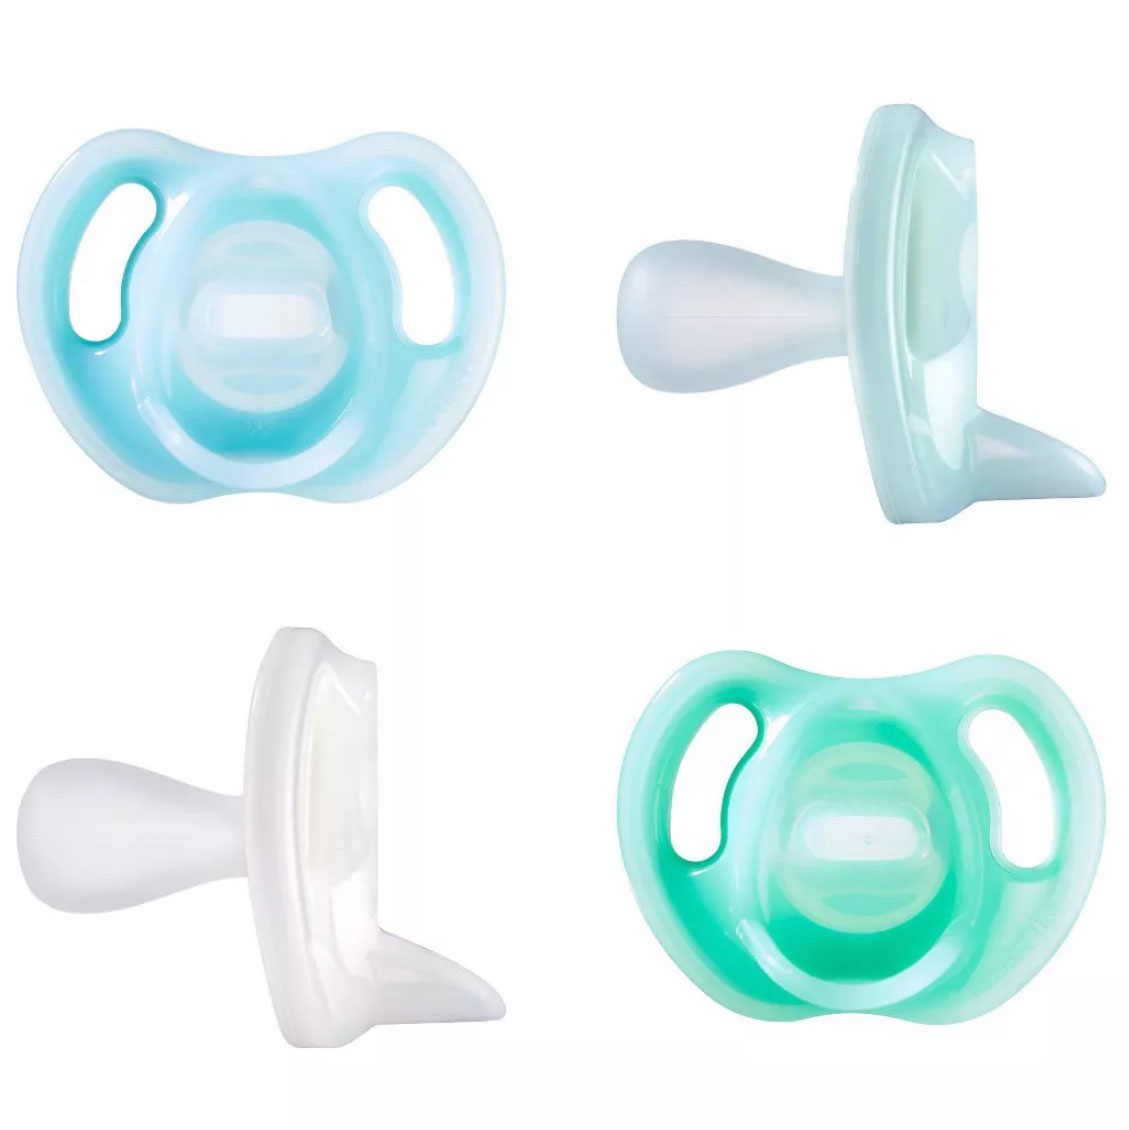 Front and side views of silicone pacifiers